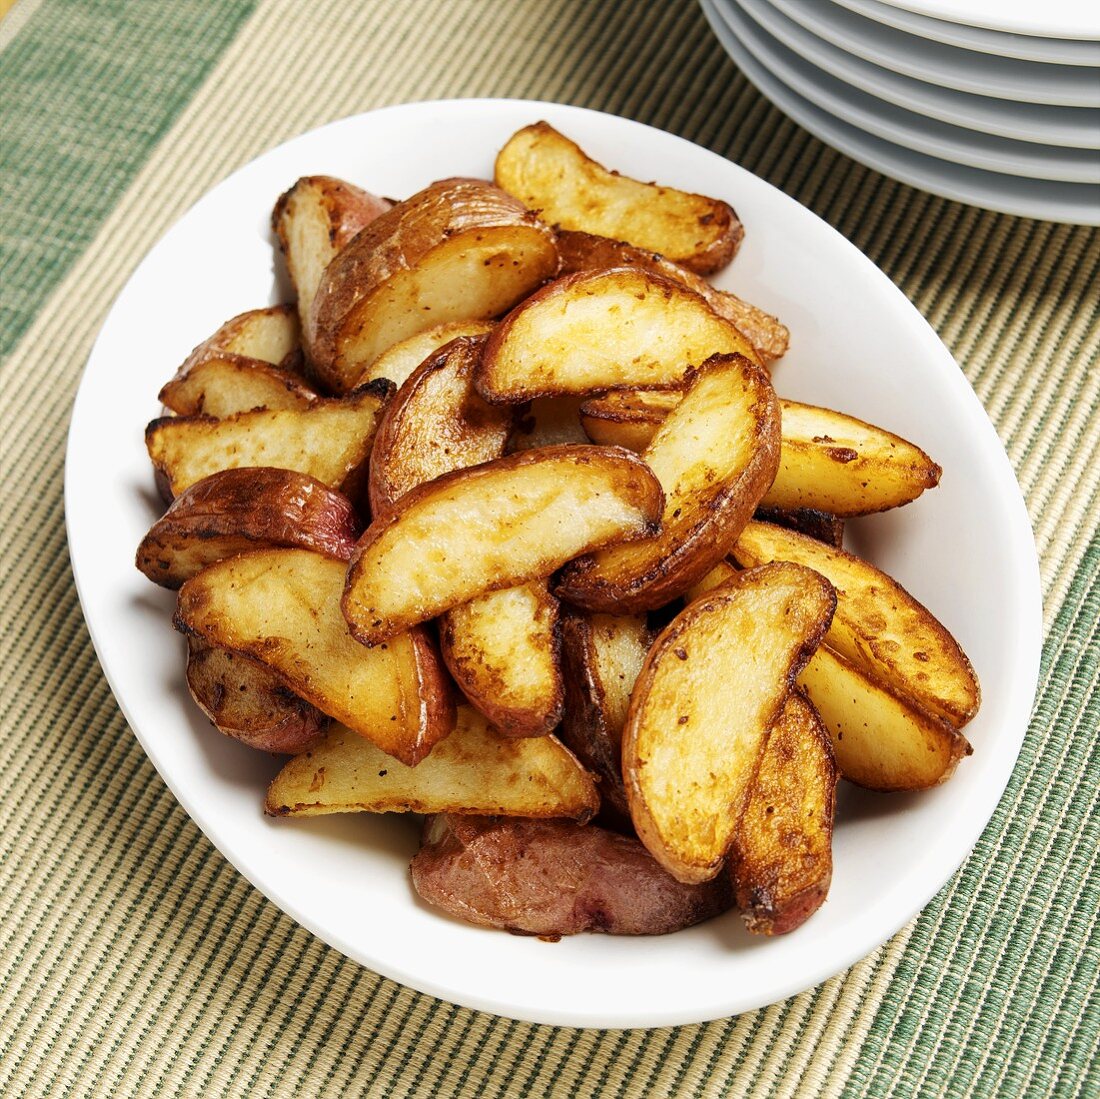 Fried red potatoes on white plate